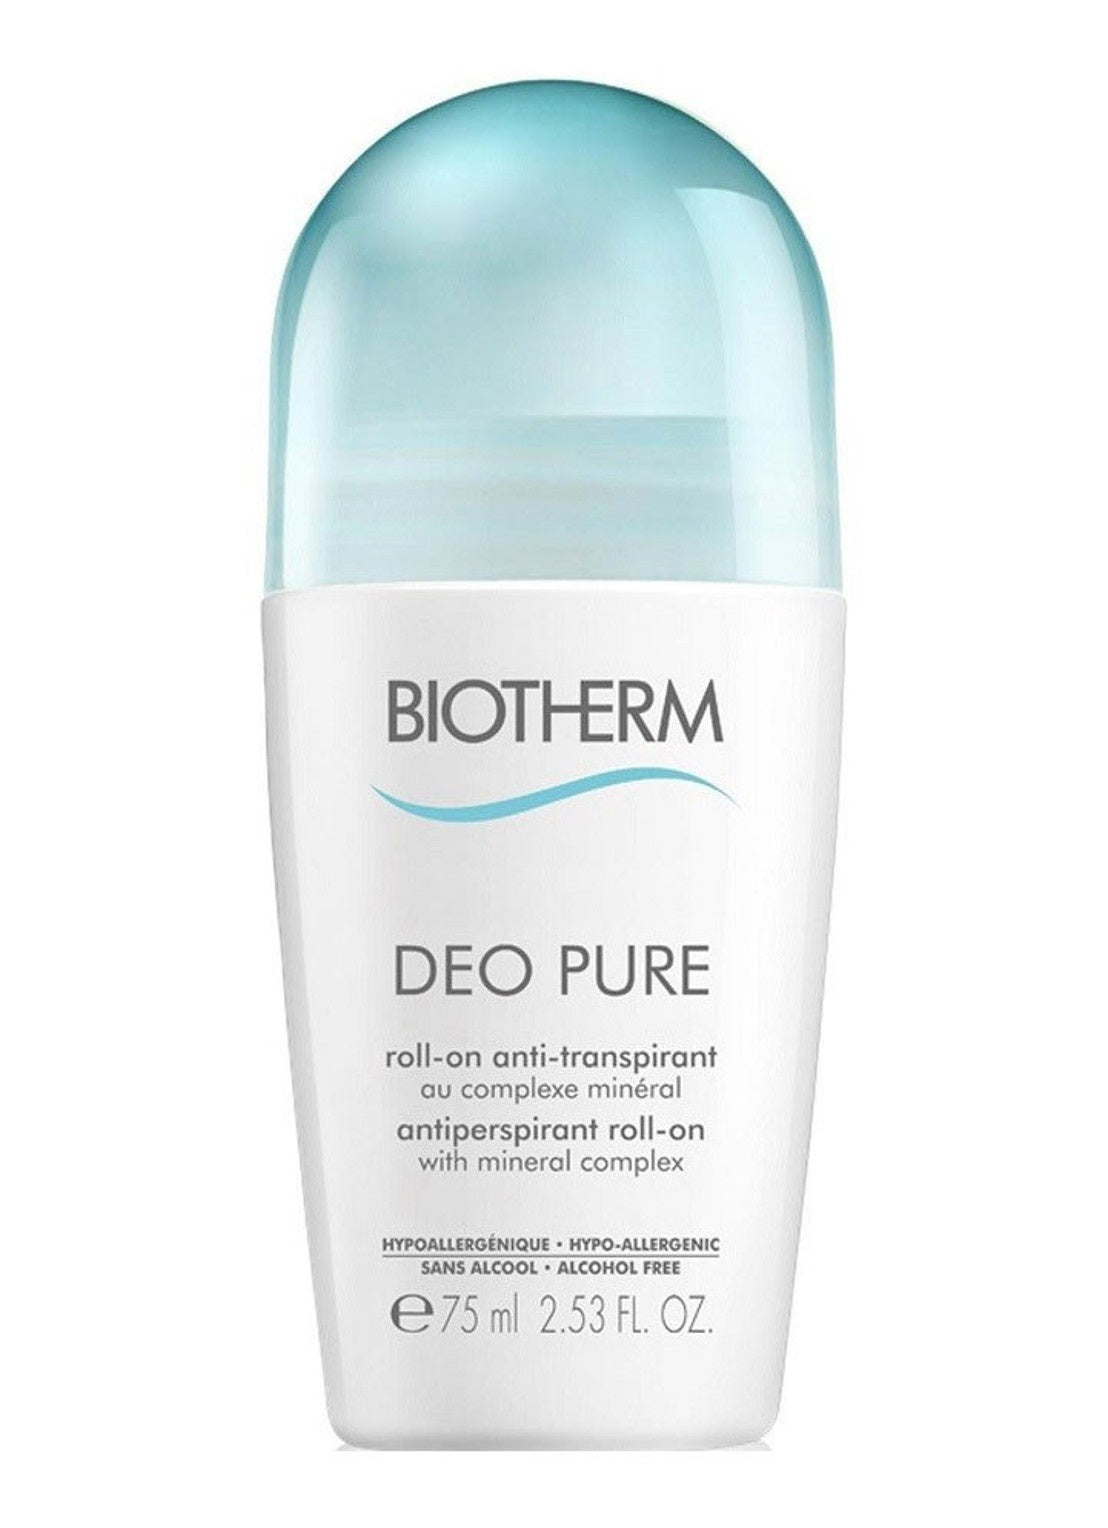 Deo Pure Anti-transpirant Roll-On